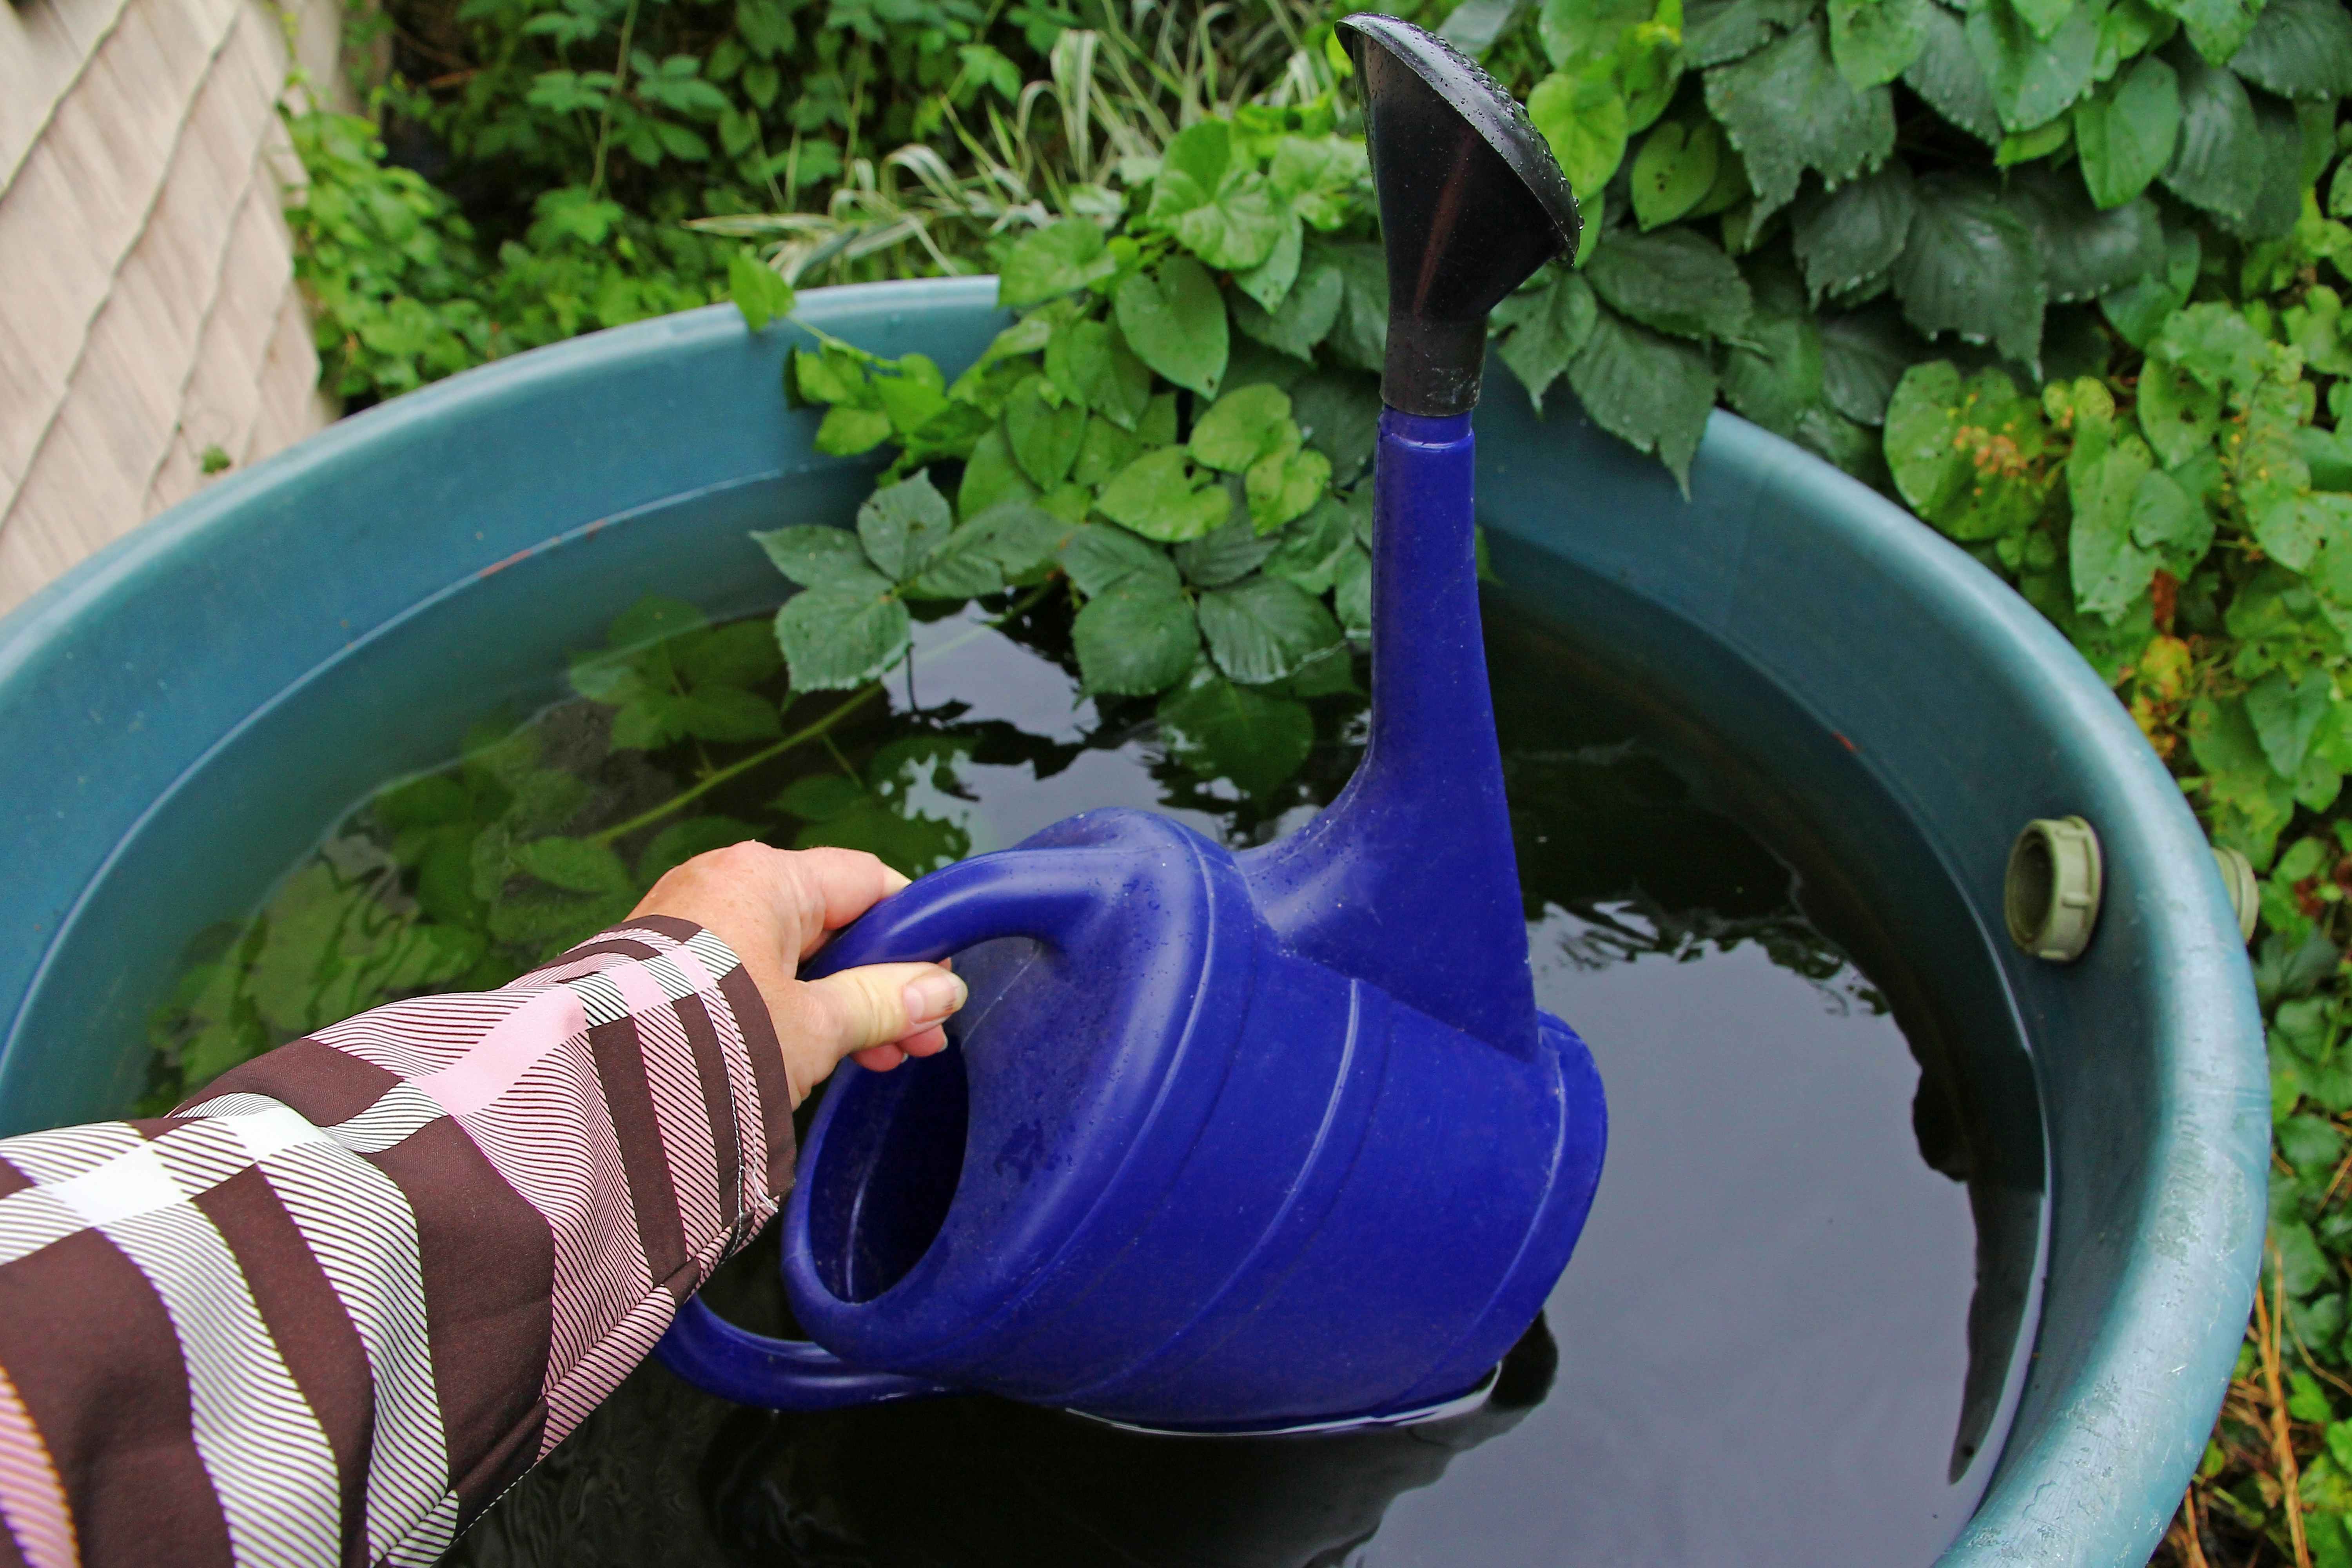 Woman filling a watering can in a barrel of rainwater.